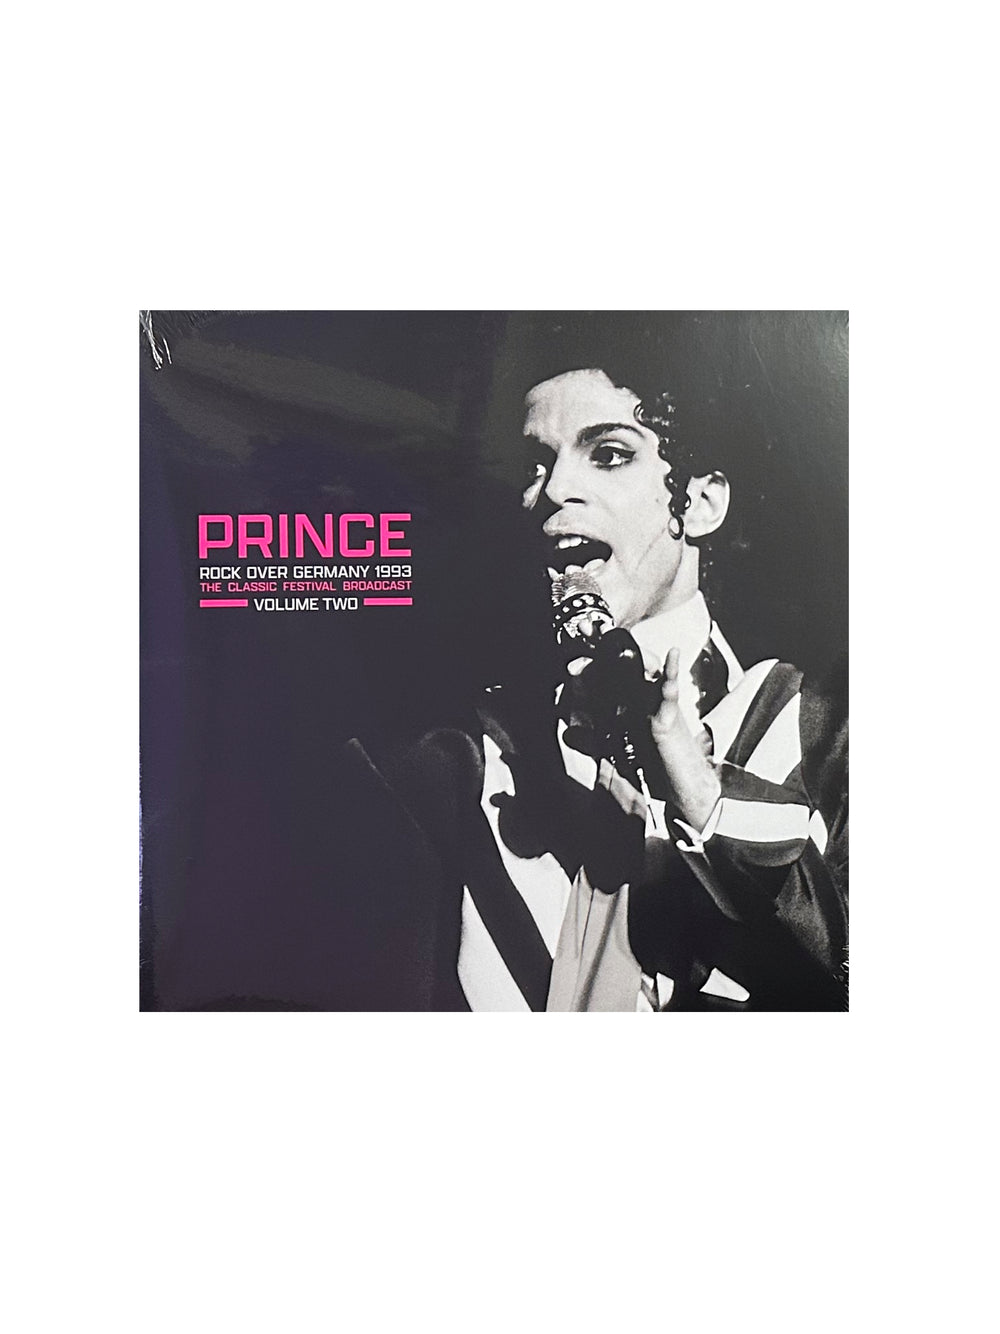 Prince – Rock Over Germany Vol 2 Vinyl LP x 1 Licence Approved: NEW 1993